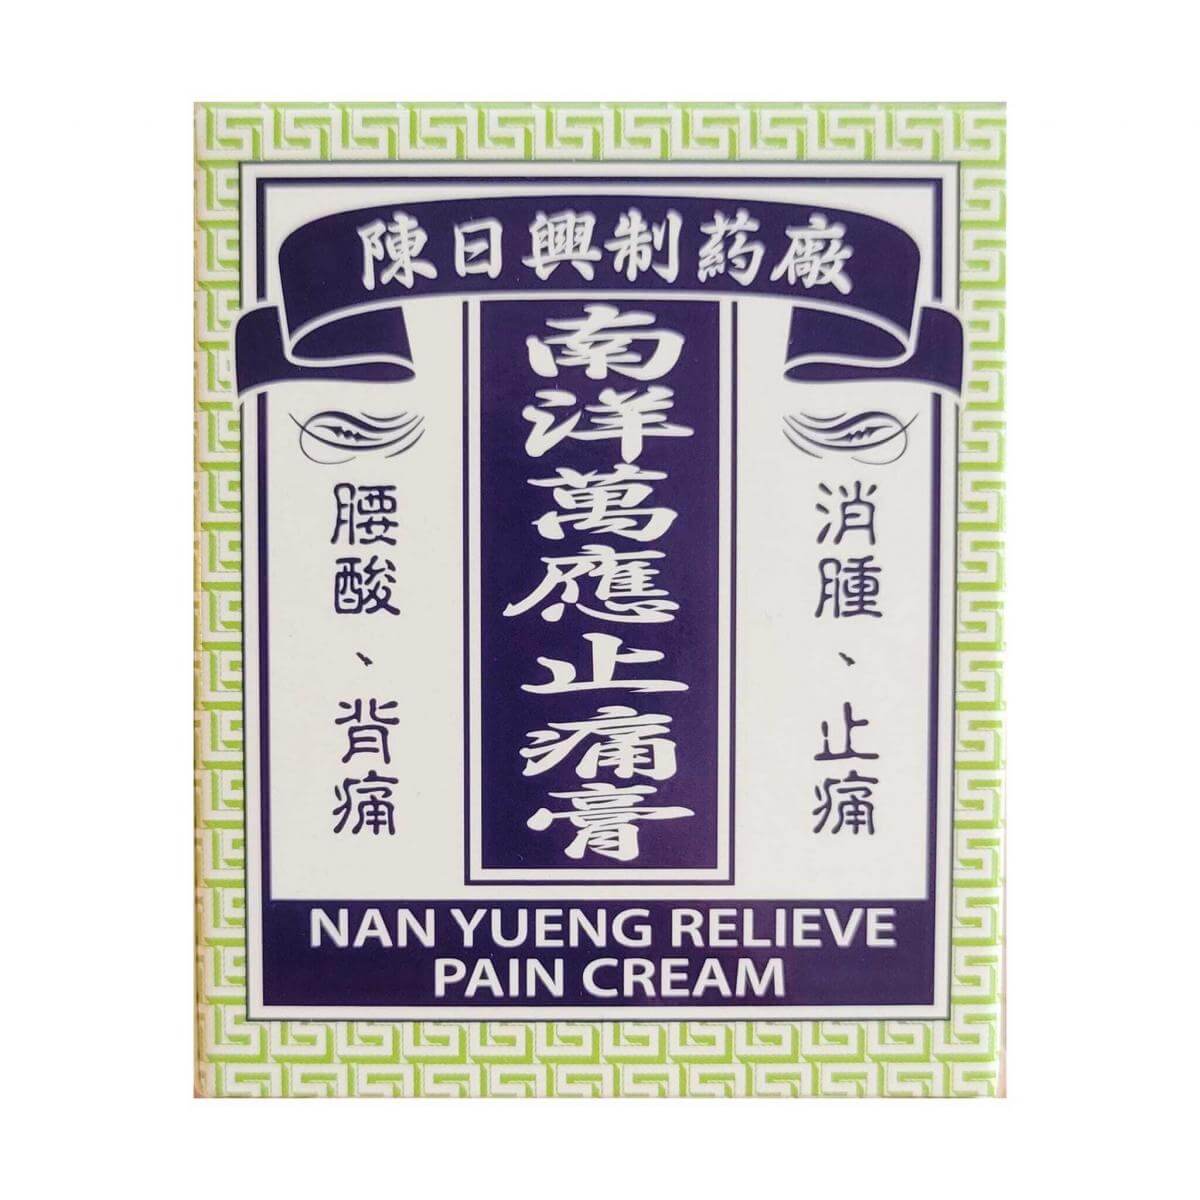 Nan Yueng Relieve Pain Cream, Medicated Balm (73 Grams) Buy At New Green Nutrition